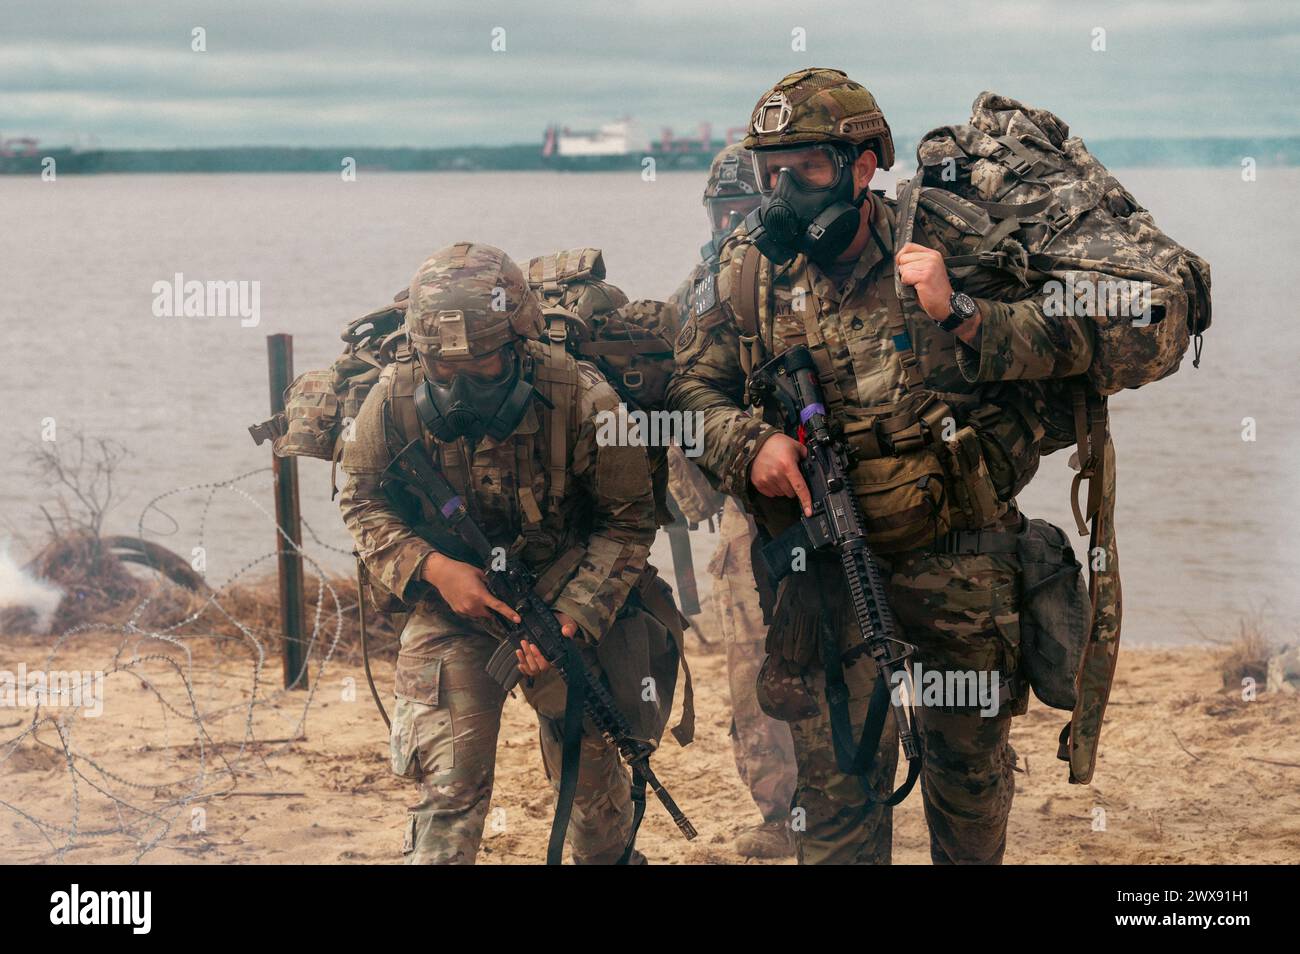 U.S. Army Sgt. Mireya Rosales-Peres and Staff Sgt. Roman Zaytsev, 44th Medical Brigade, ruck in a simulated Chemical, Biological, Radiological, and Nuclear (CBRN) environment at Joint Base Langley-Eustis, Virginia, March 5, 2024. The U.S. Army Best Squad Competition, a bi-annual event hosted by the 7th Transportation Brigade (Expeditionary) this year, allows squads to safely demonstrate their mission readiness and represent the XVIII Airborne Corps at higher levels of competition.(U.S. Air Force photo by Airman 1st Class Skylar Ellis) Stock Photo